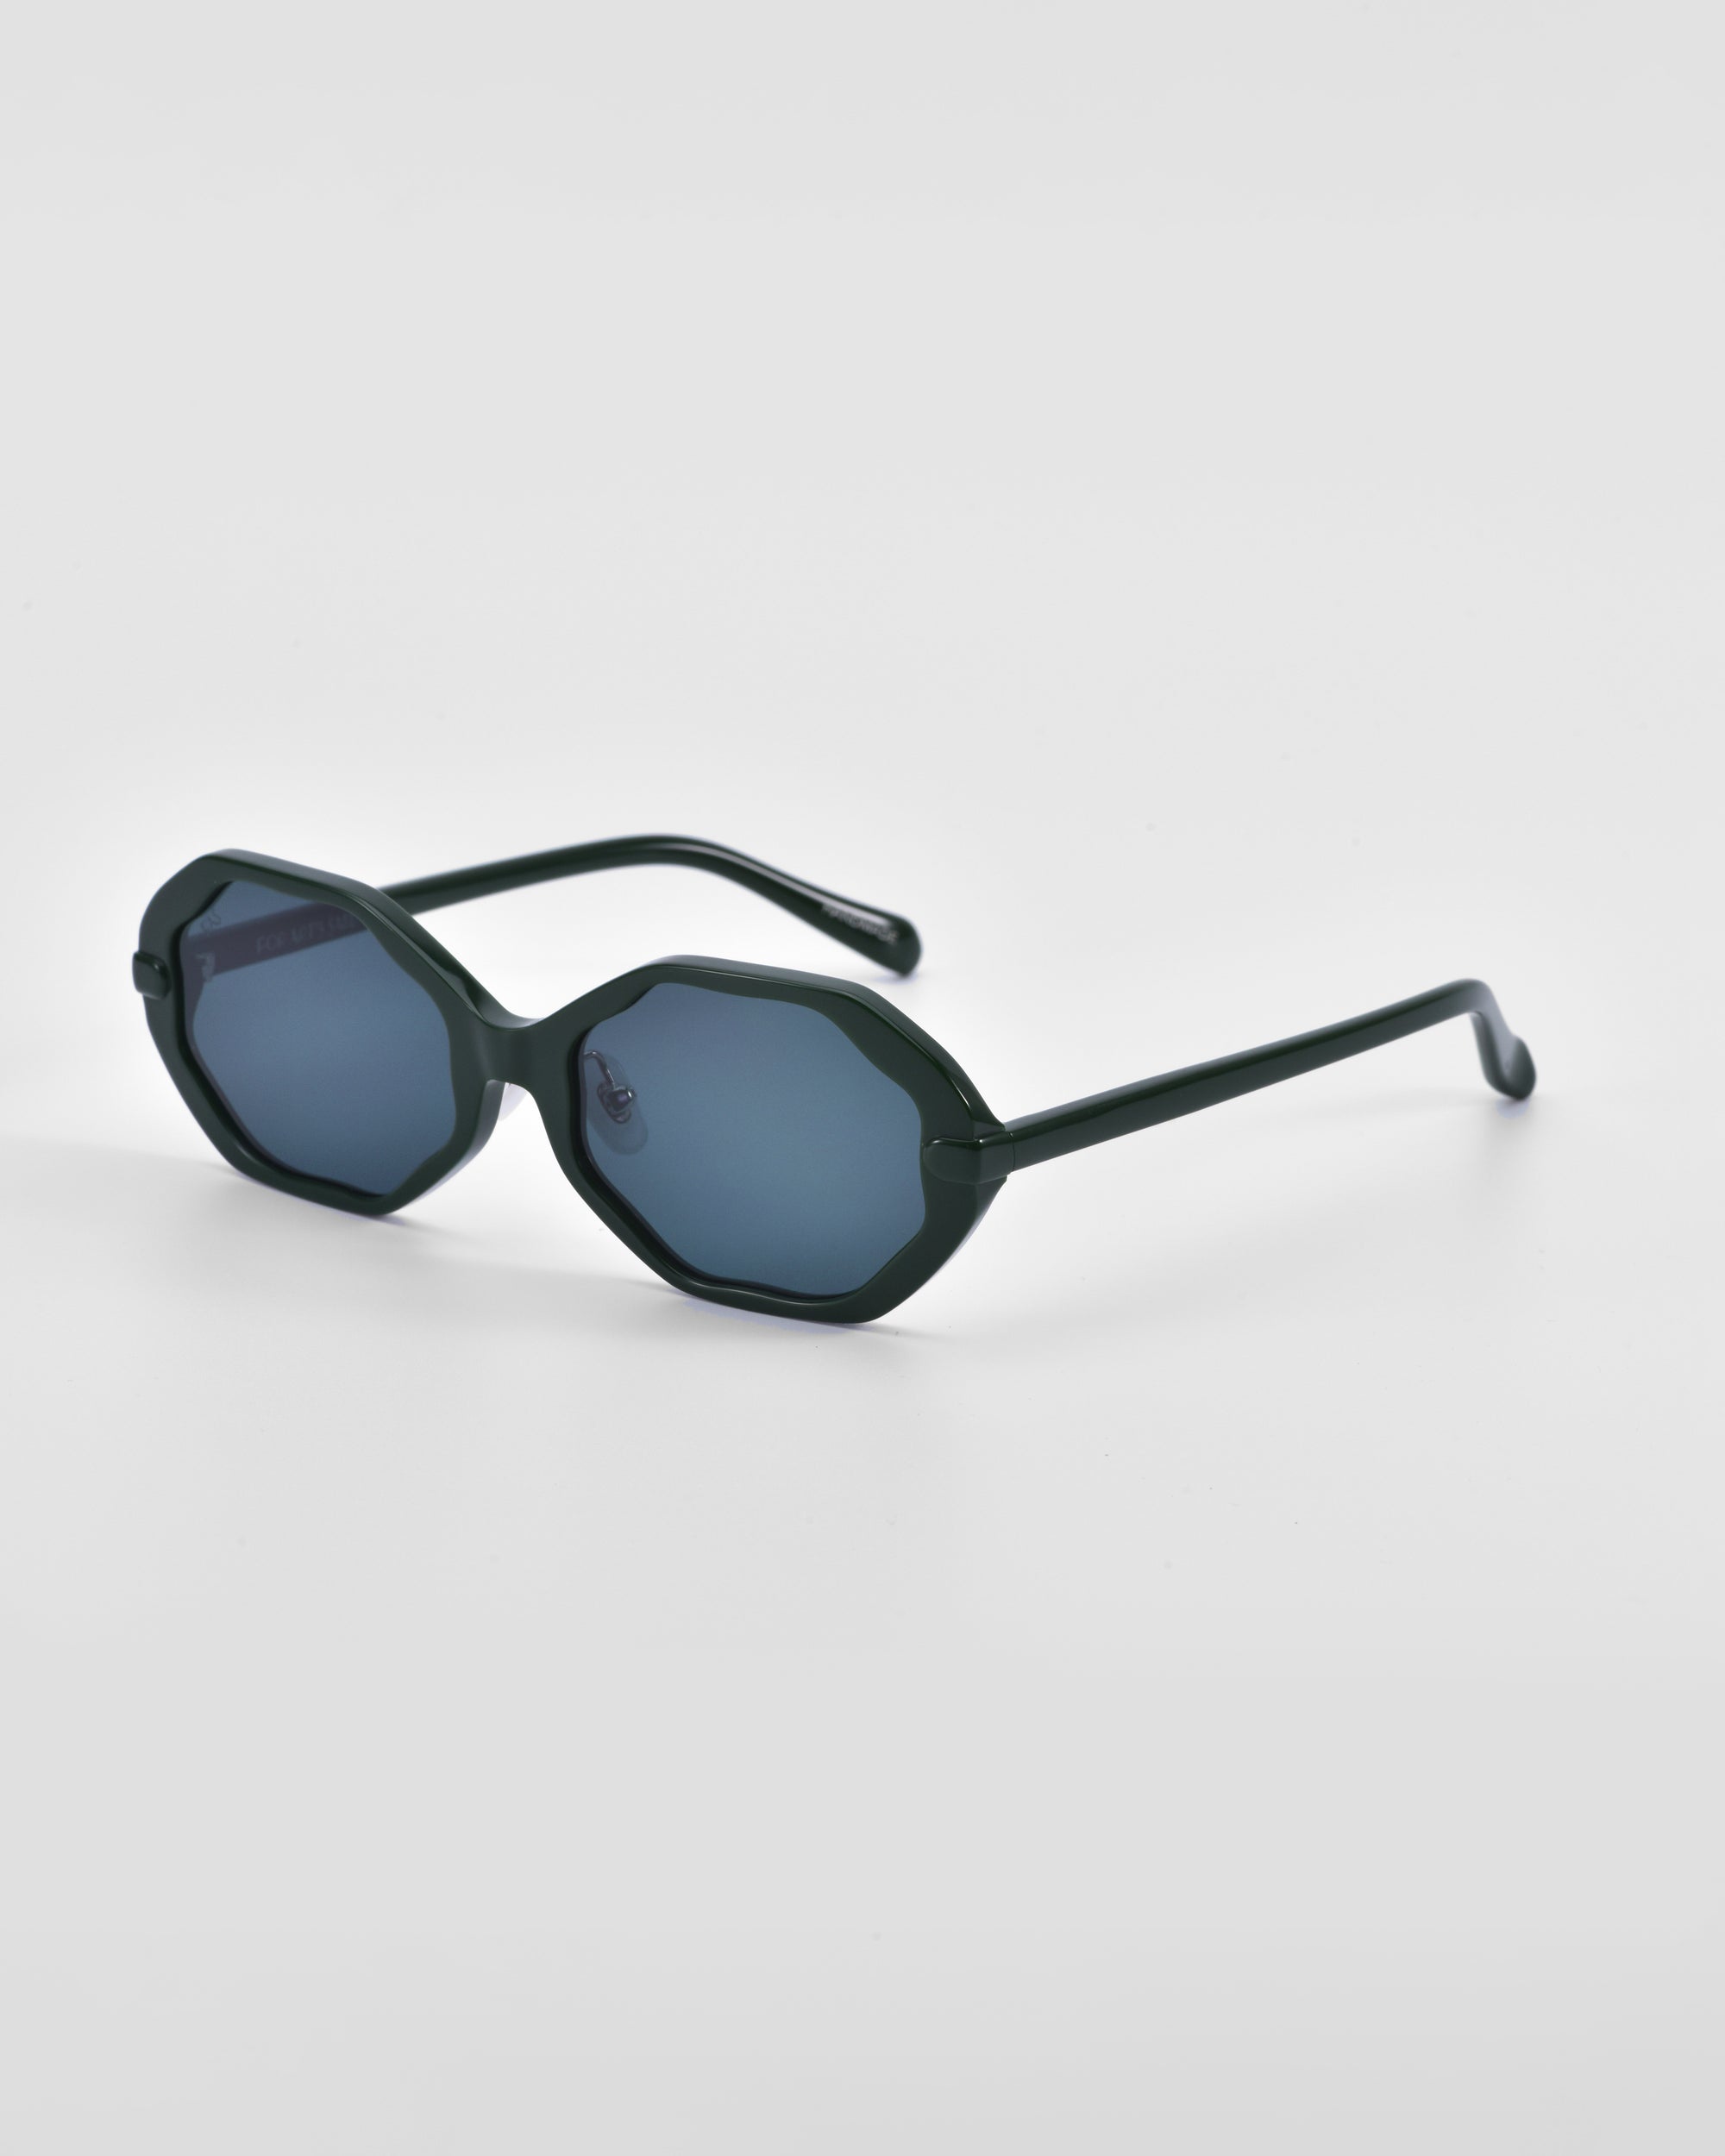 A pair of For Art&#39;s Sake® Lotus sunglasses featuring a dark green angular silhouette and dark tinted lenses, complemented by thin matching green arms and jade-stone nose pads, placed on a plain white background.